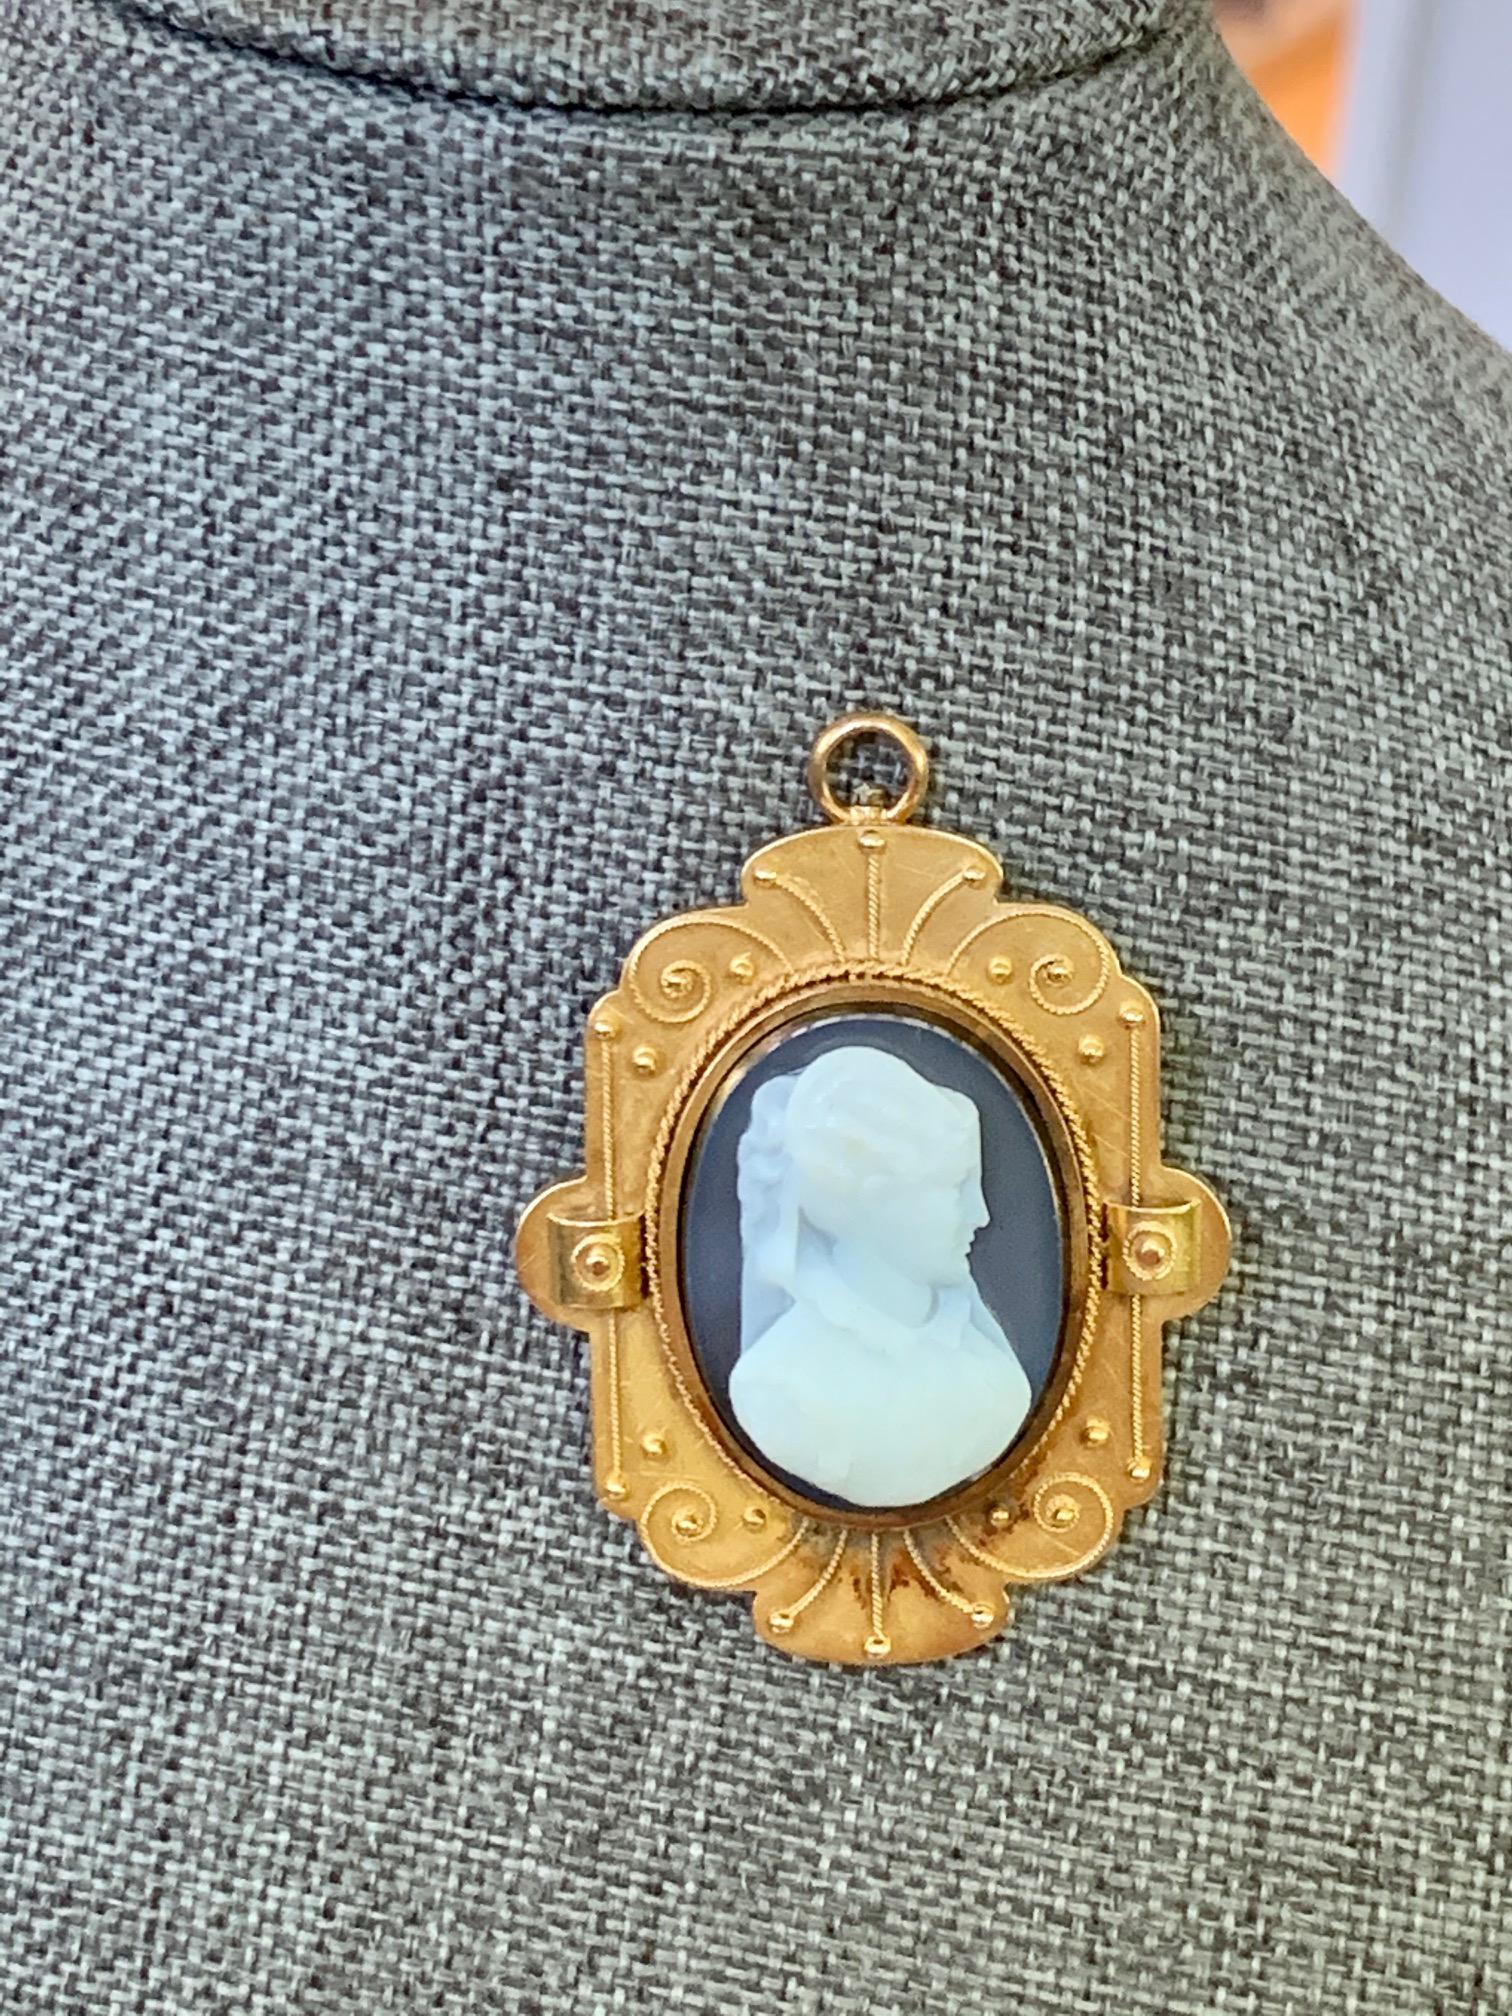 Etruscan Style Stone Cameo Pin/Pendant  In Good Condition For Sale In St. Louis Park, MN